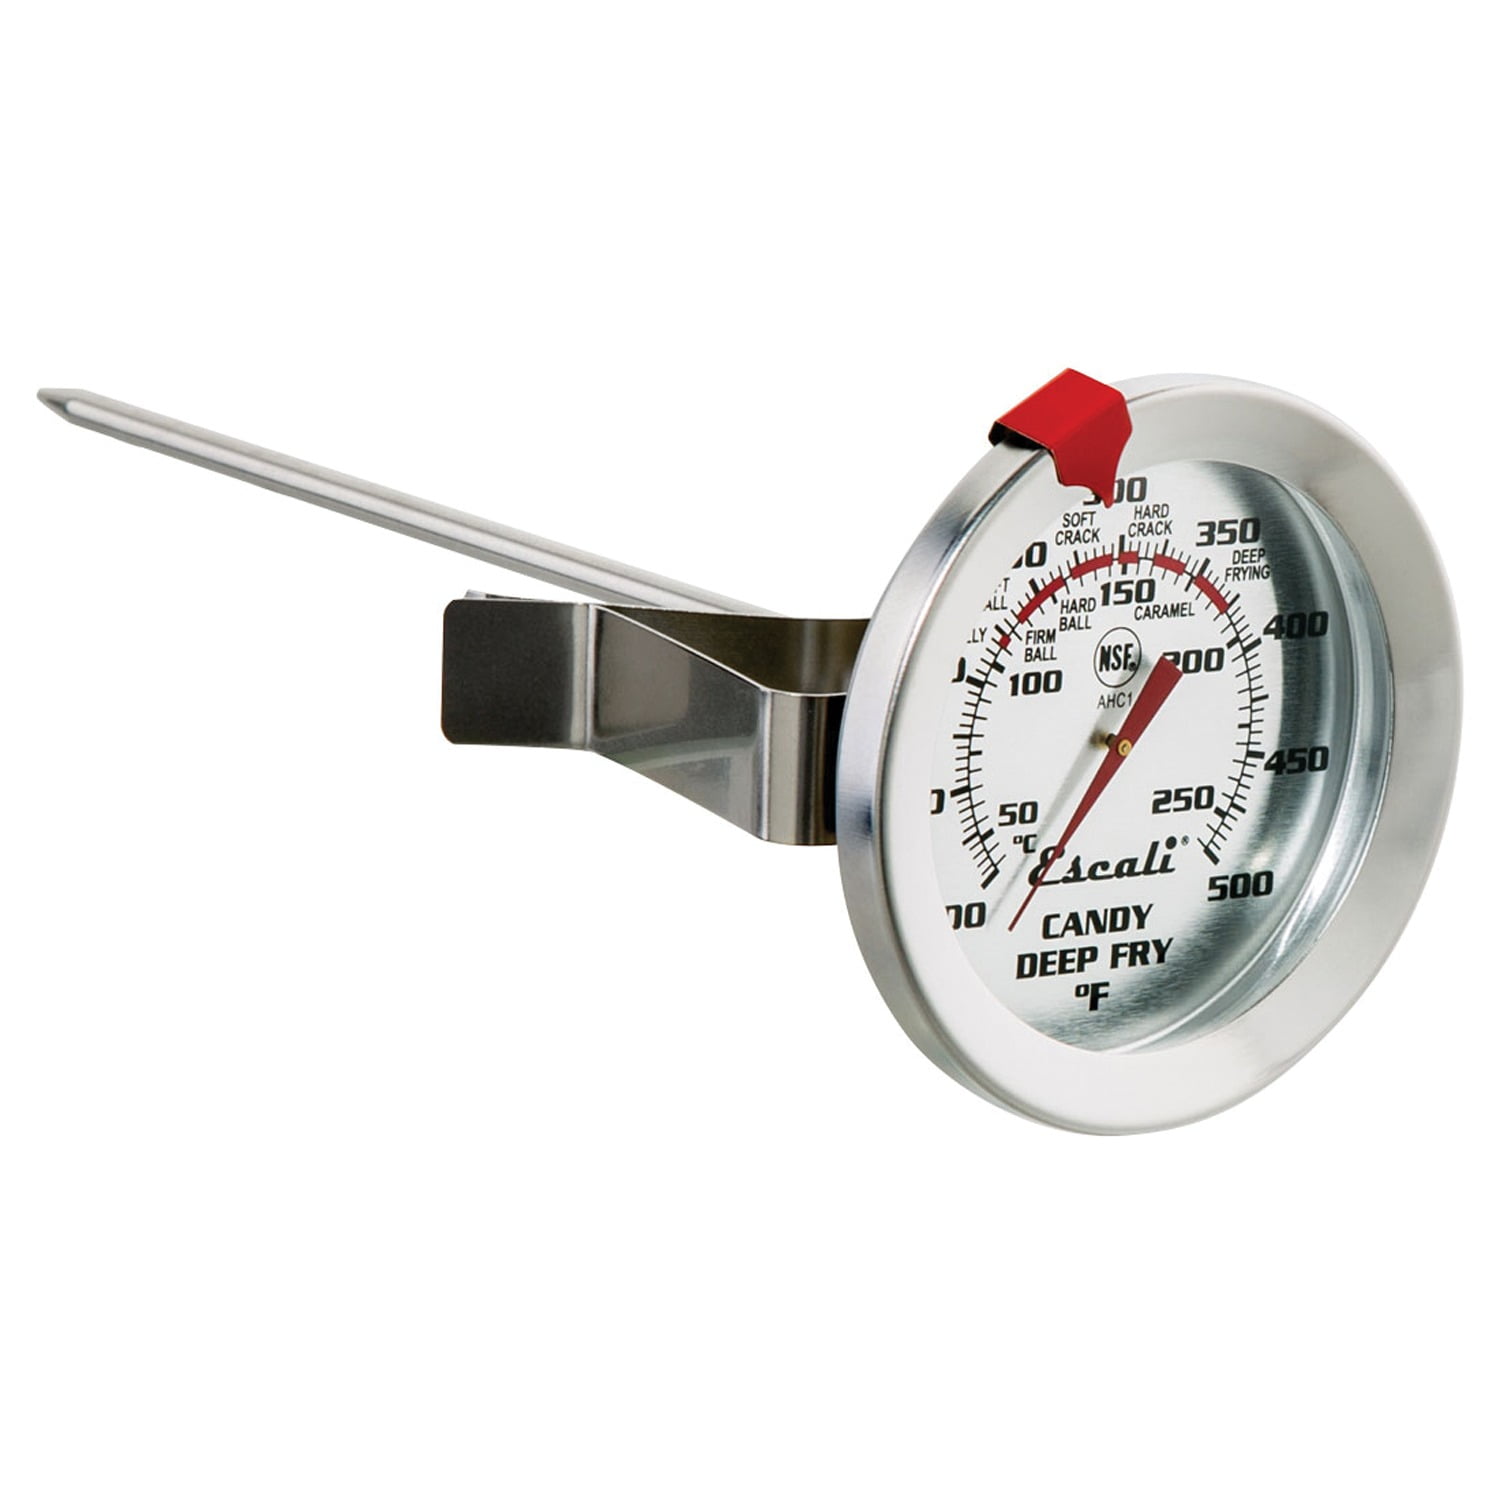 Escali Candy / Deep Fry Thermometer